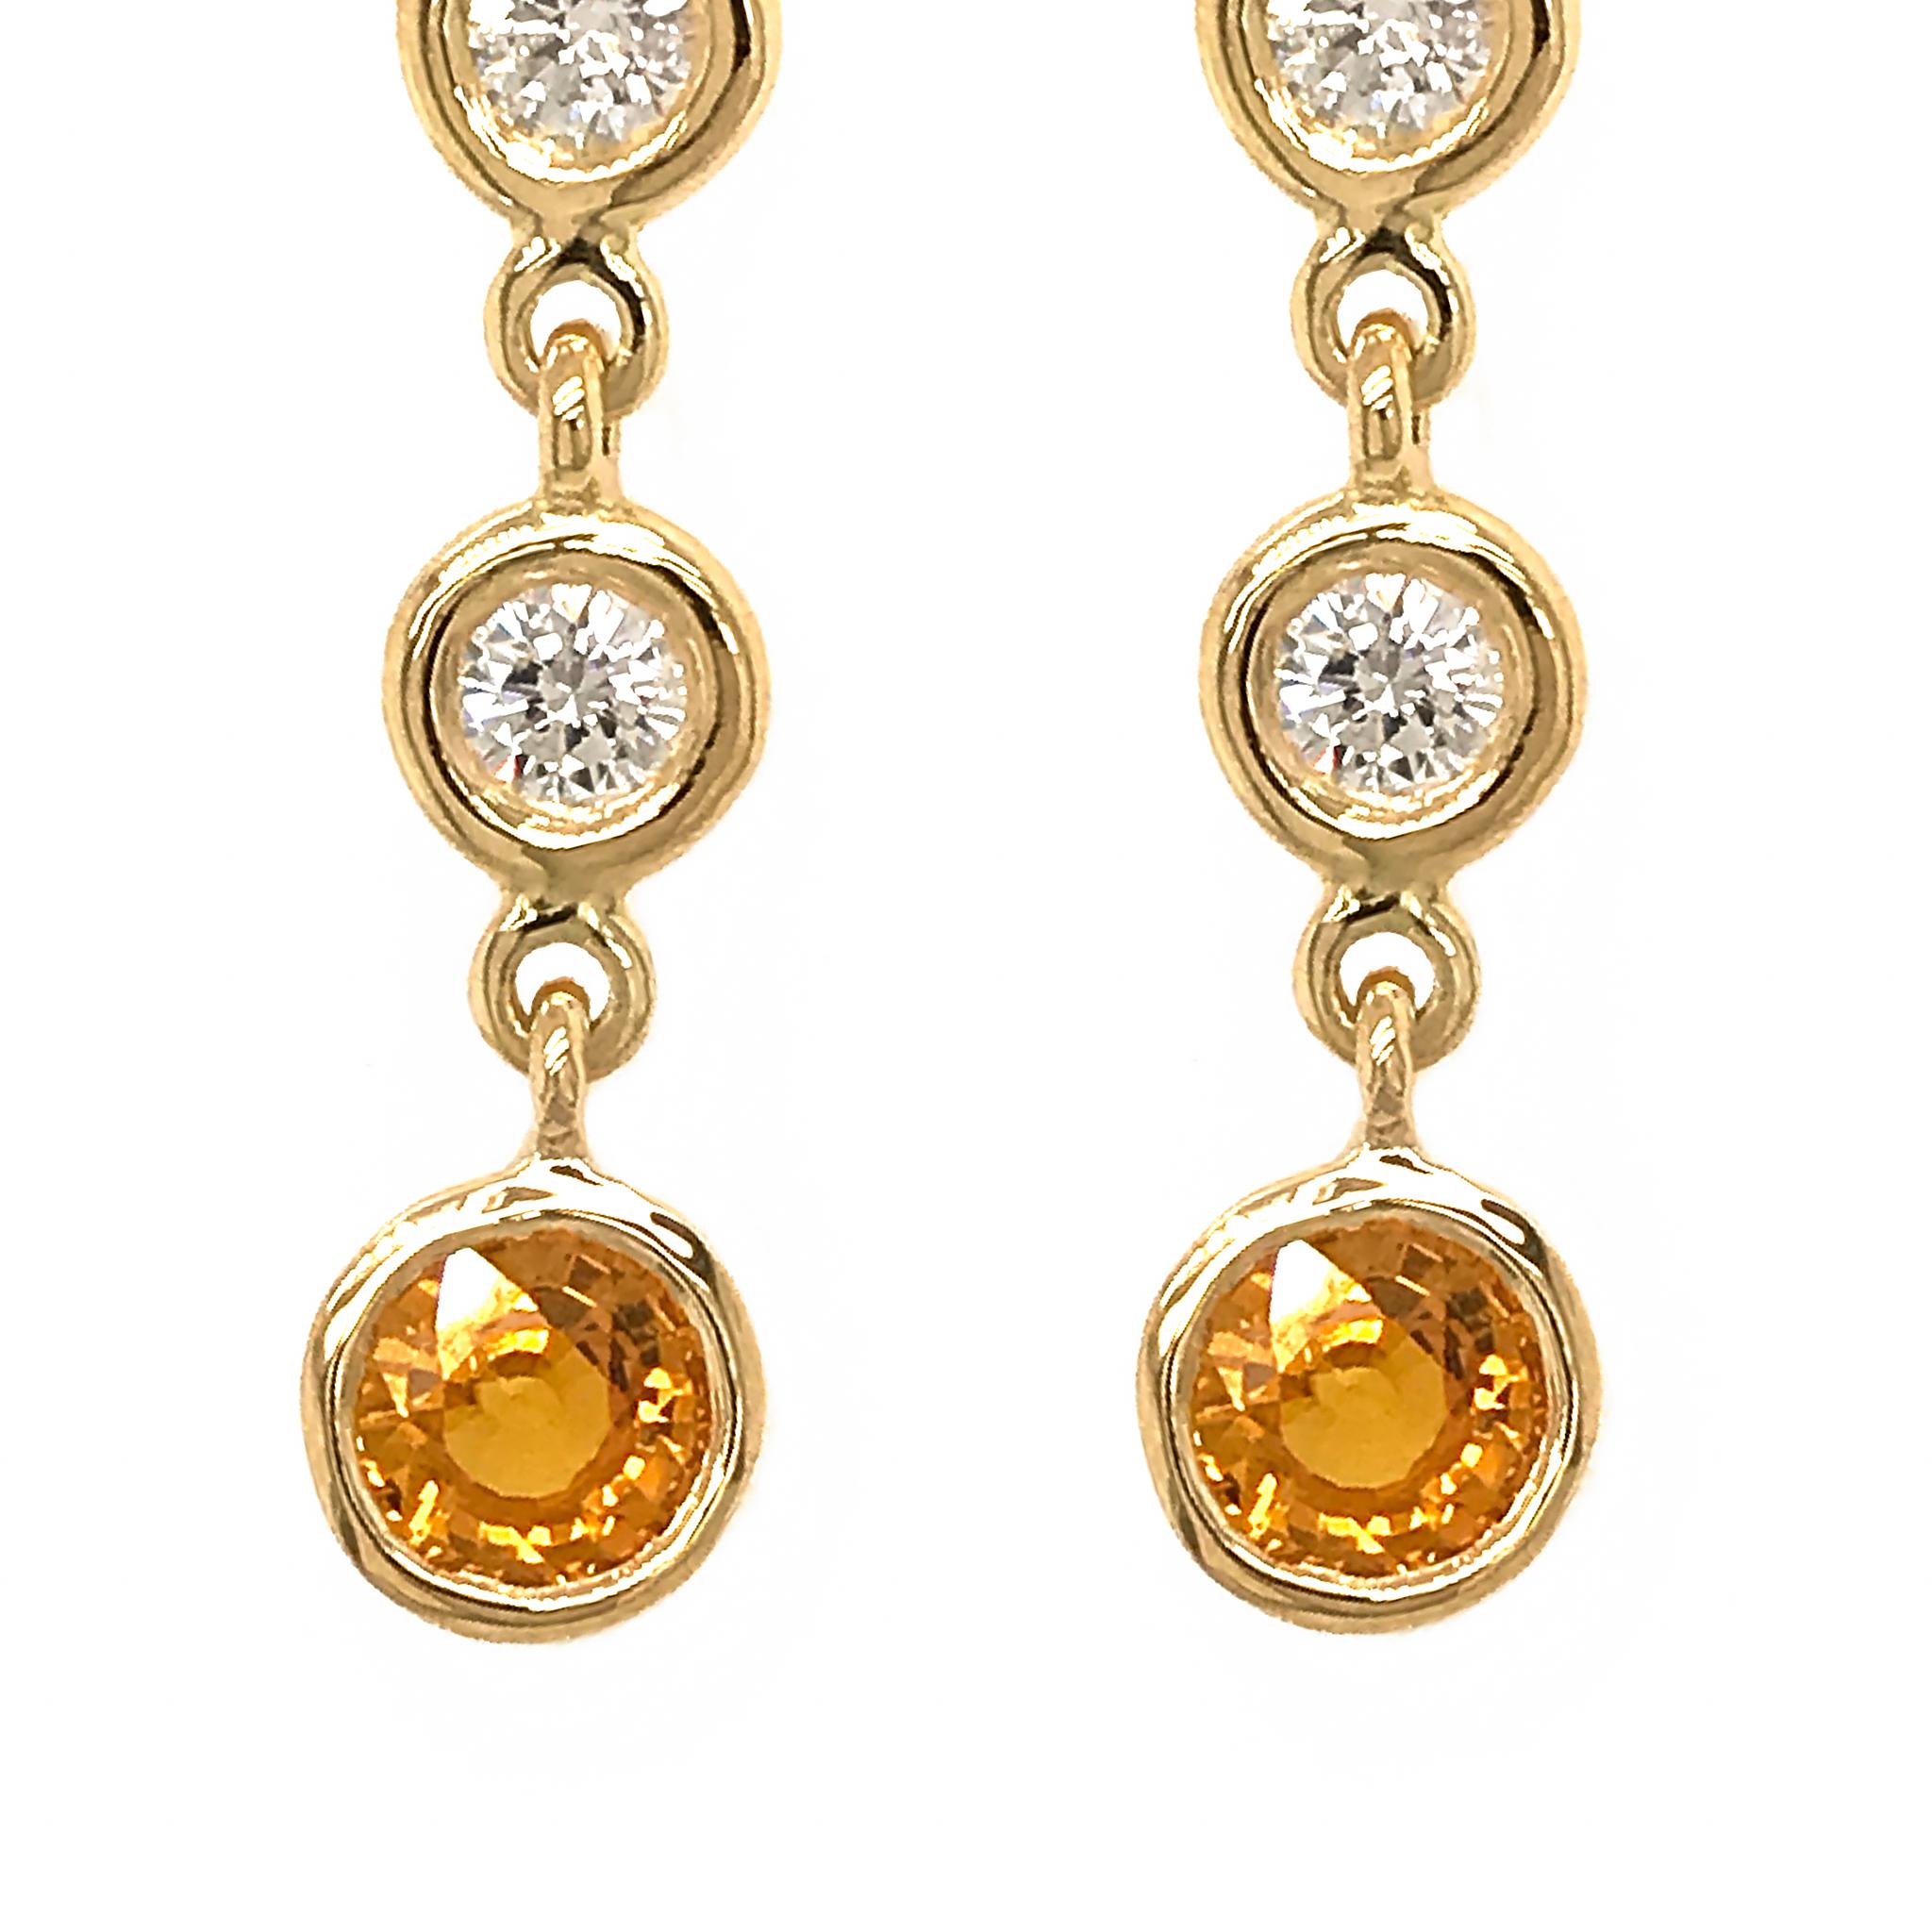 18K Yellow Gold
Diamond: 0.71 ct twd
Yellow Sapphire: 1.10 ct twd
Total Weight: 3.4 grams
Earrings Length: 1.5 inches